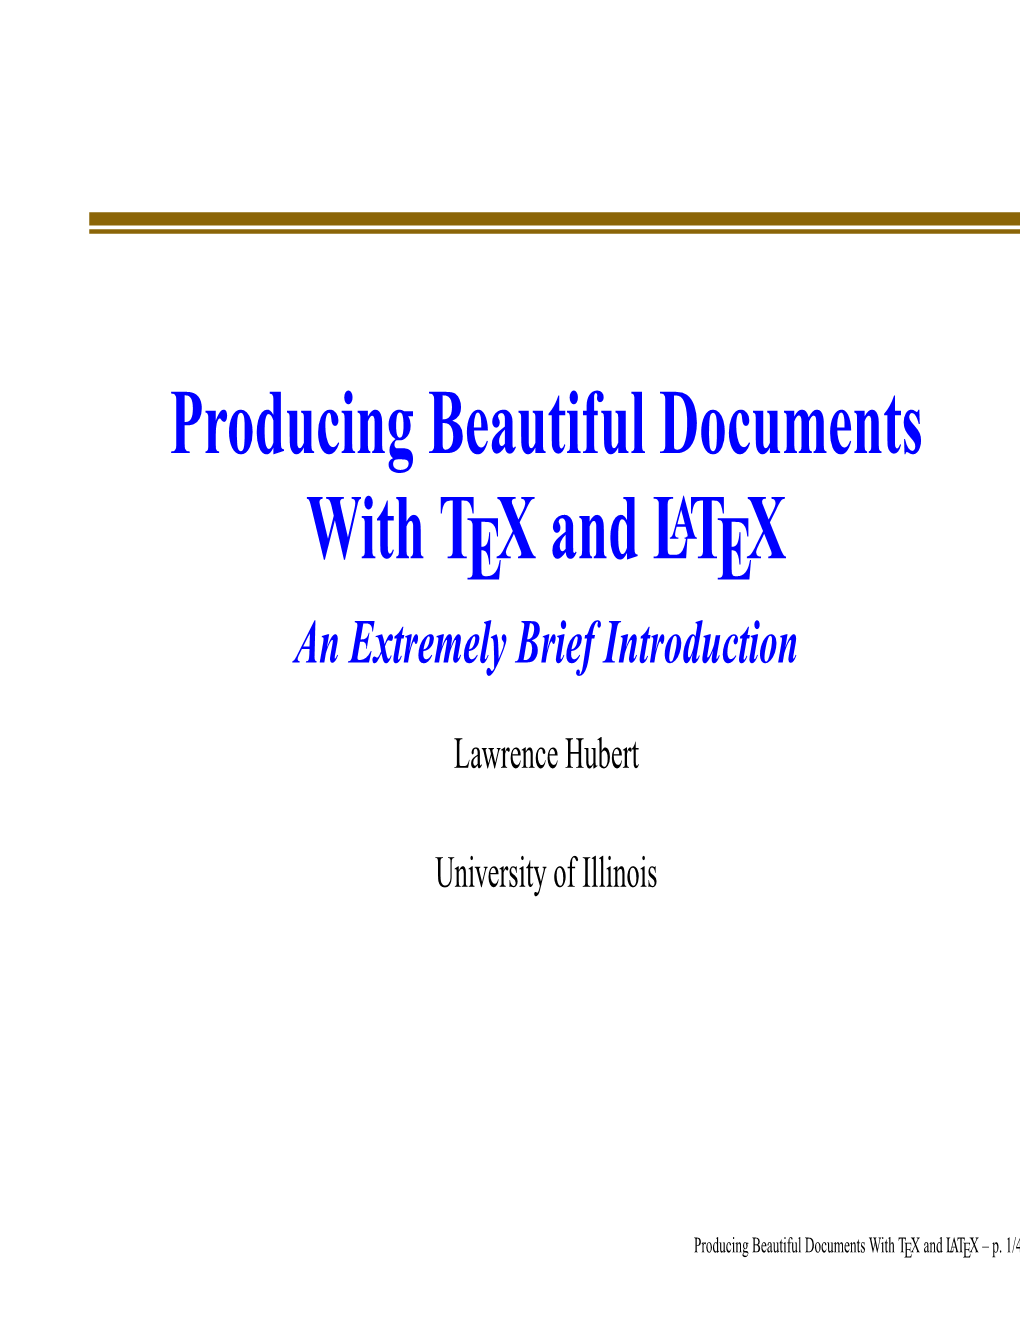 Producing Beautiful Documents with TEX and LATEX an Extremely Brief Introduction